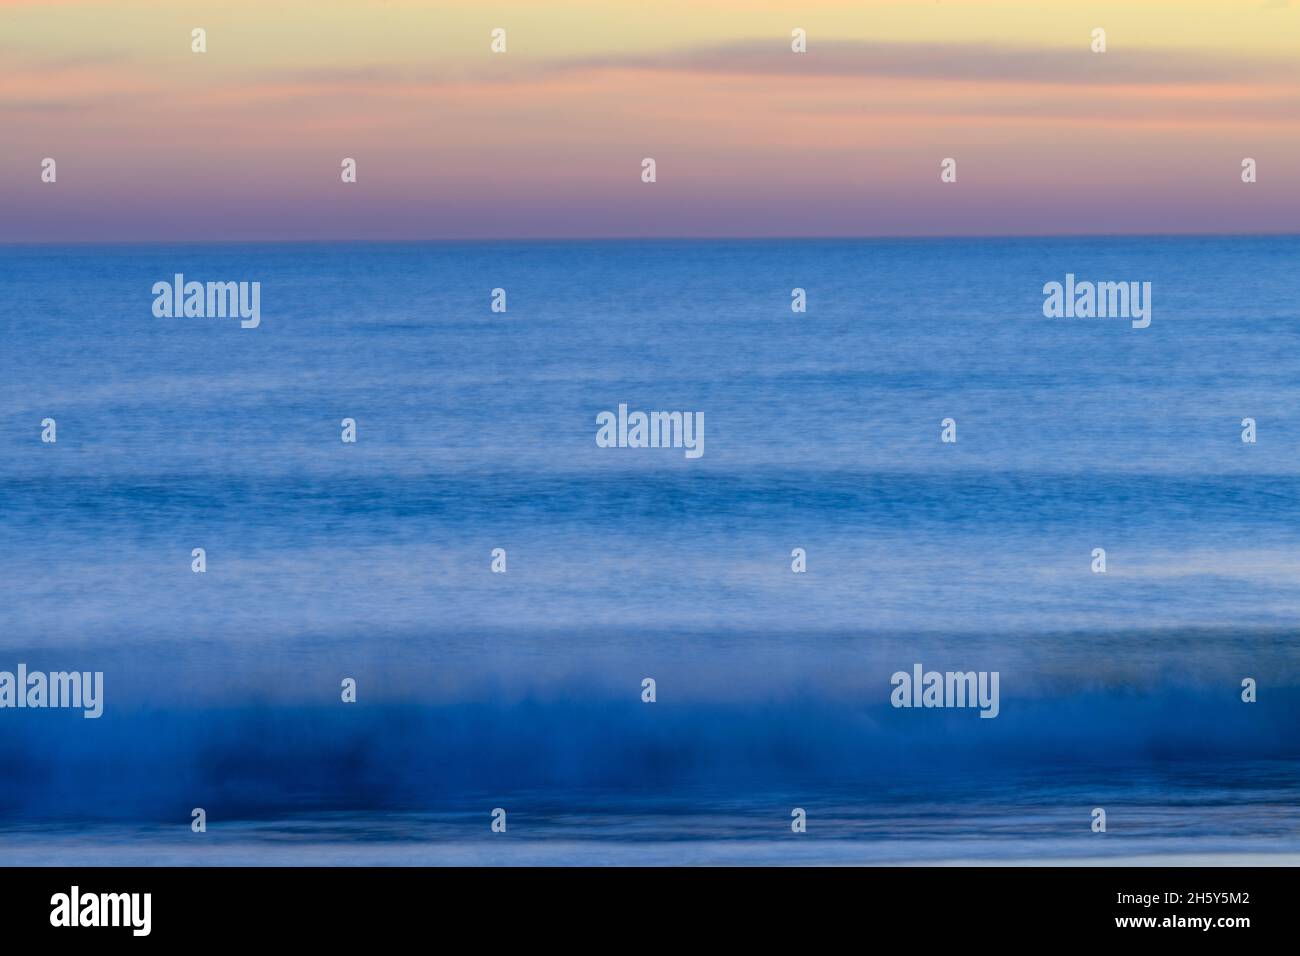 Blue abstract against the Atlantic Ocean, North Carolina, Outer Banks Stock Photo